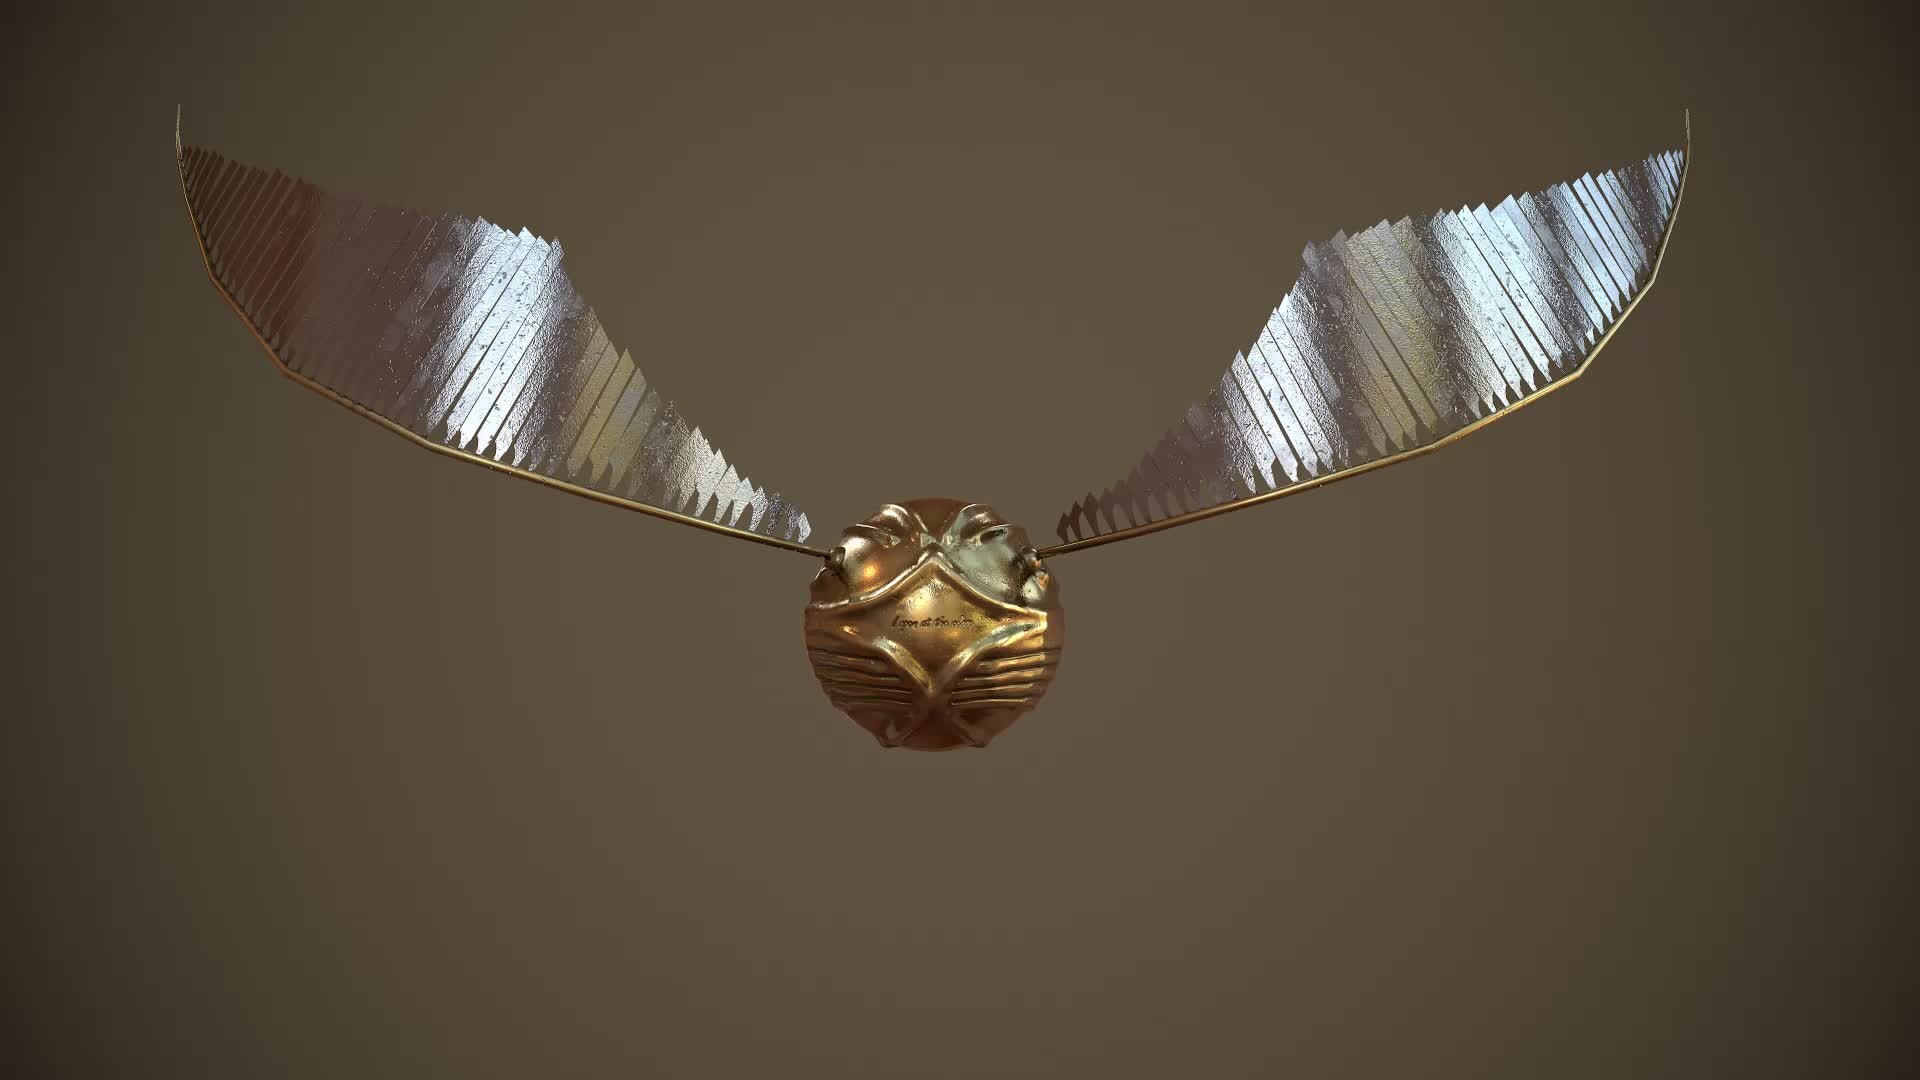 3D Golden Snitch from Harry Potter - Finished Projects - Blender